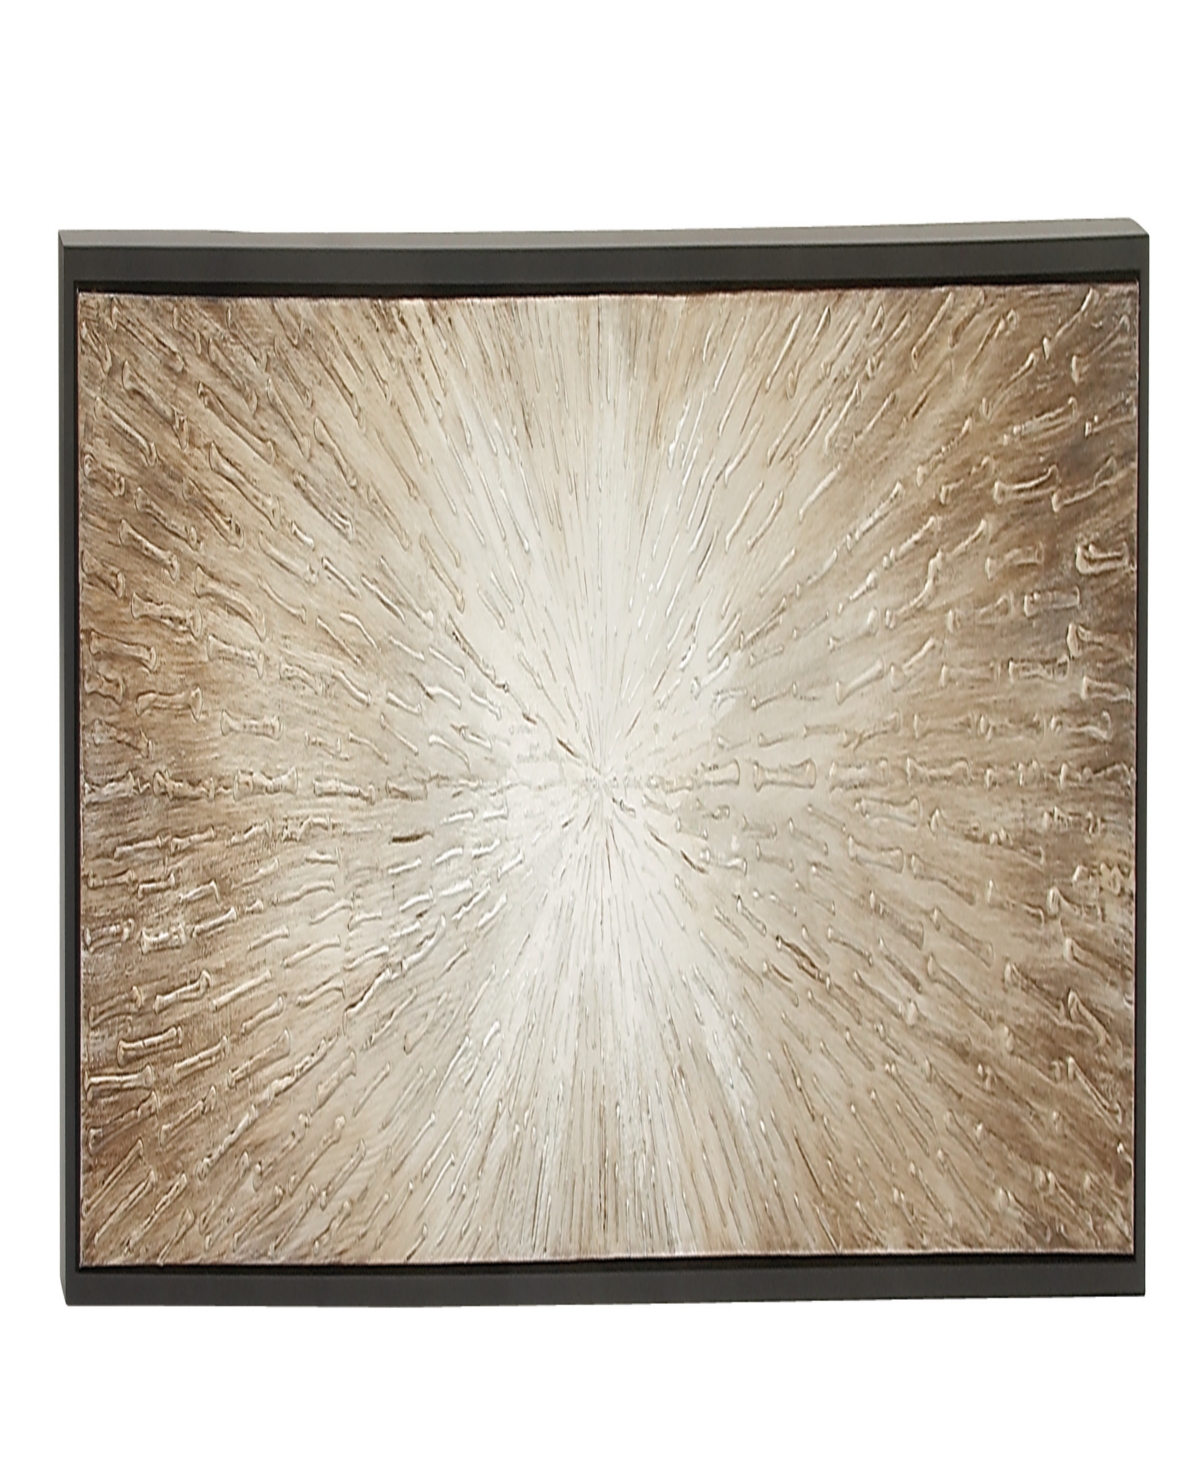 Rosemary Lane Canvas Radial Starburst Framed Wall Art With Black Frame, 71" X 1" X 20" In Brown